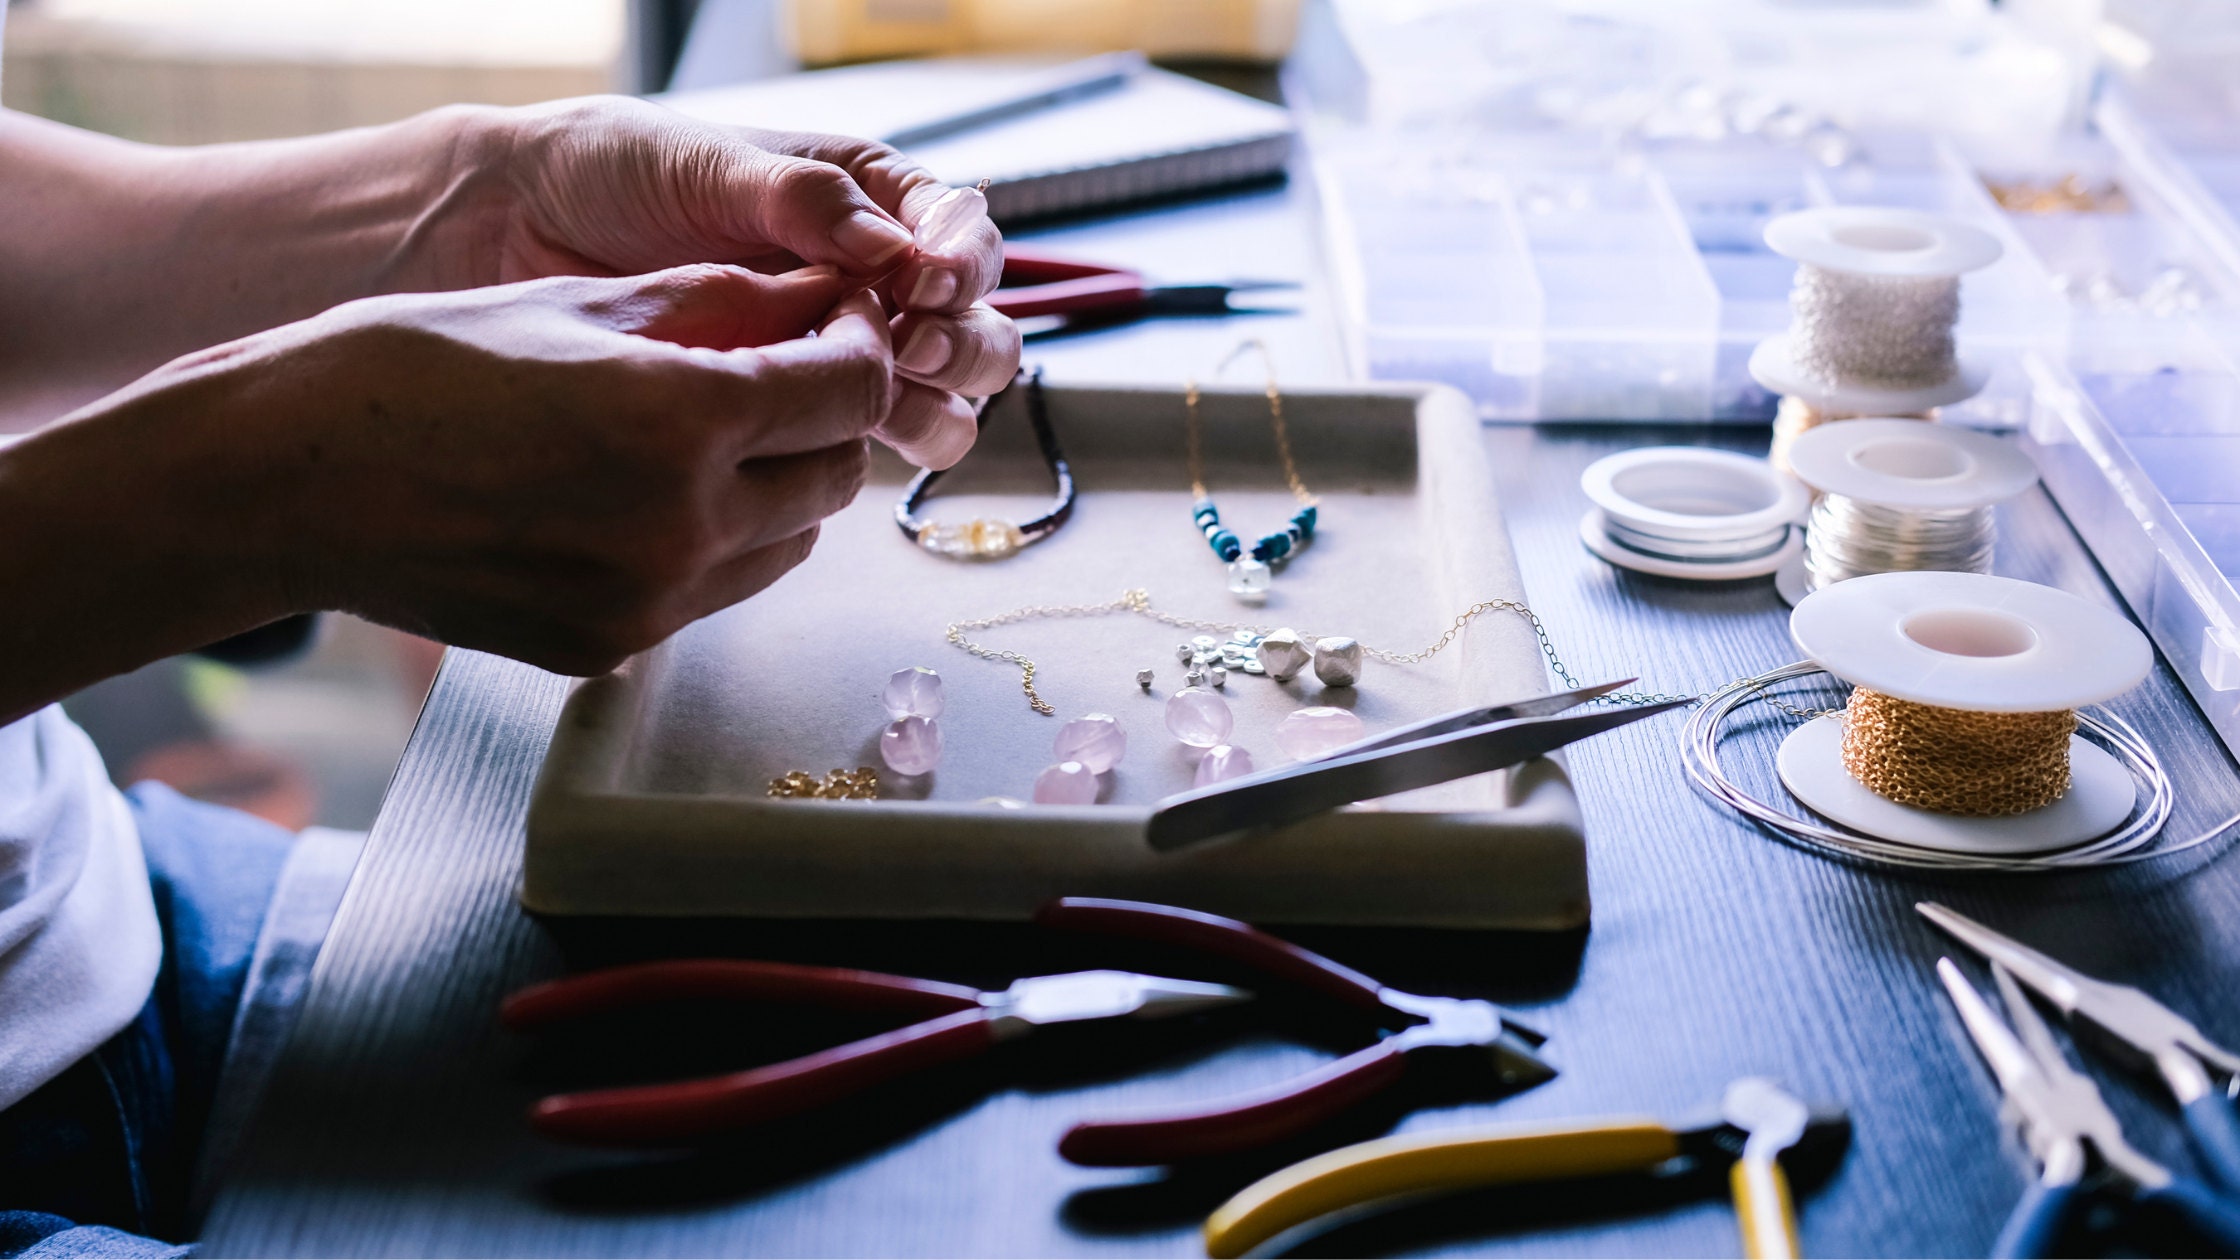 A photo of hands creating jewelry. A jewelers bench surrounded by jewelry making supplies.